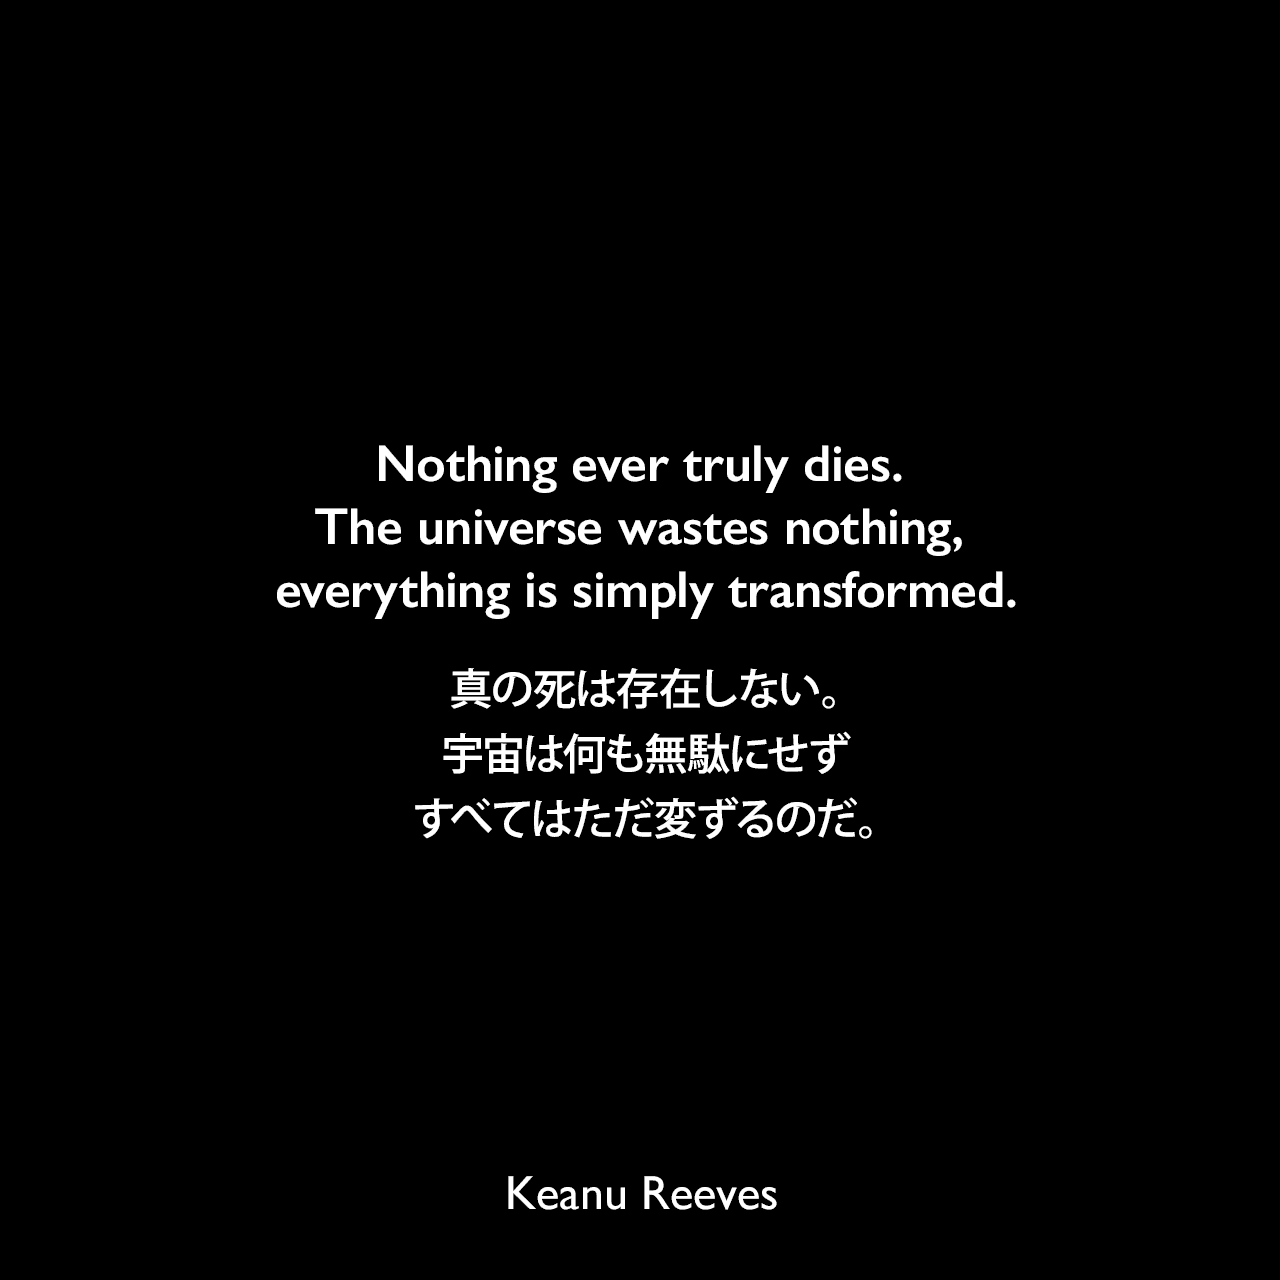 Nothing ever truly dies. The universe wastes nothing, everything is simply transformed.真の死は存在しない。宇宙は何も無駄にせず、すべてはただ変ずるのだ。Keanu Reeves